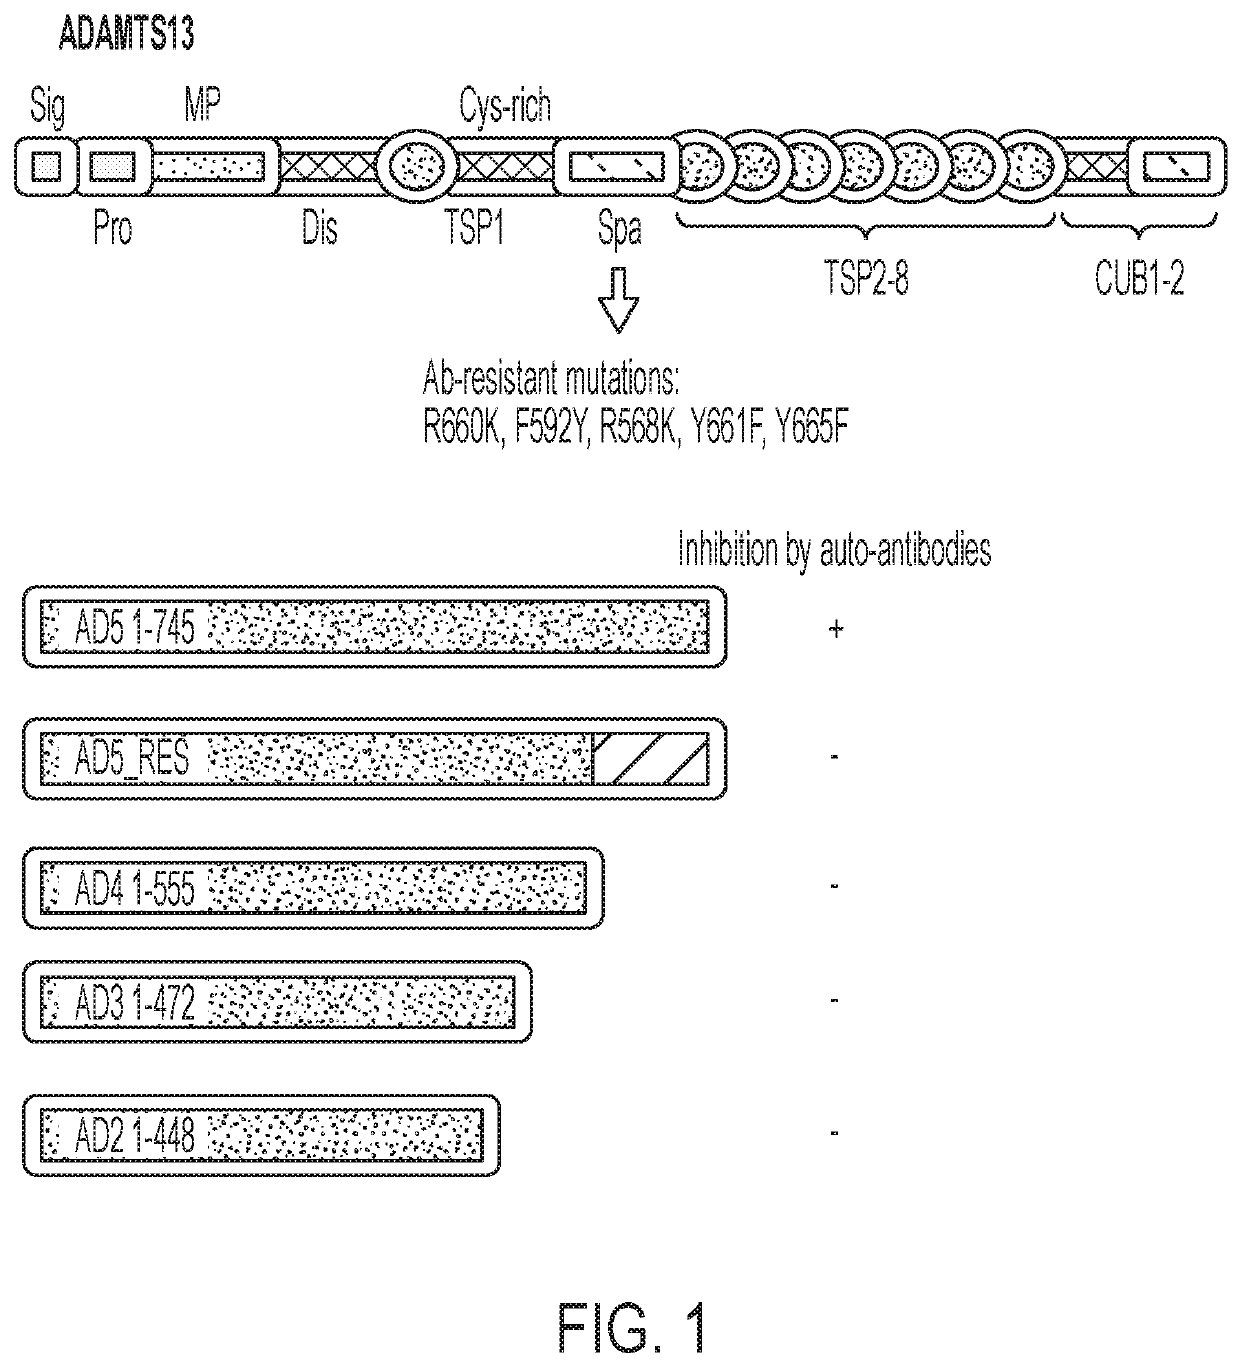 Red blood cells expressing von willebrand factor protease and methods of use thereof